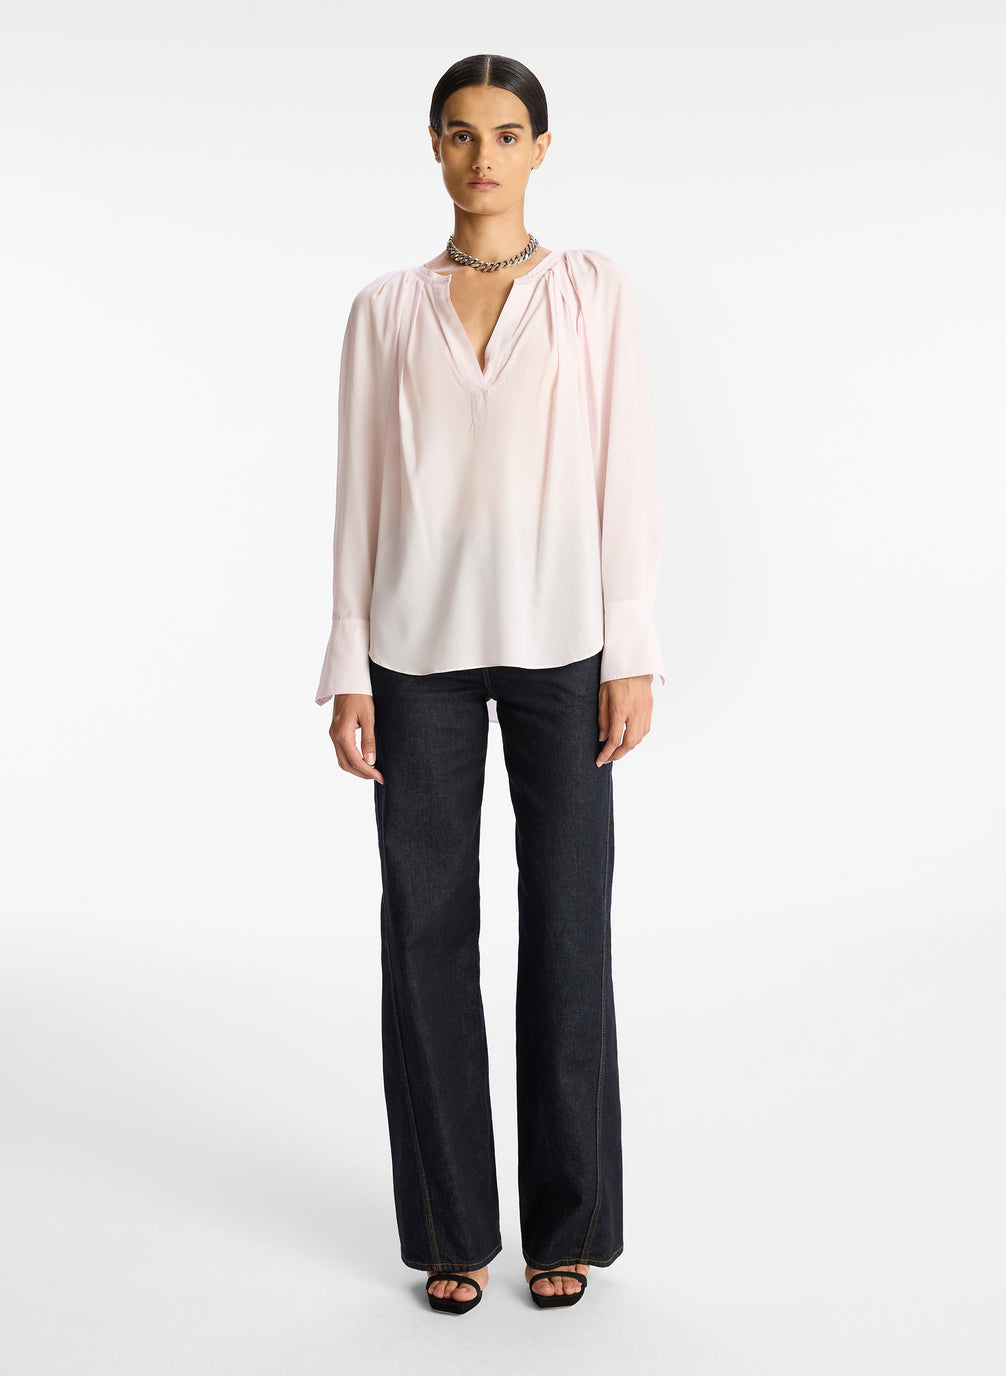 front view of woman wearing light pink v neck long sleeve silk top and dark wash denim jeans